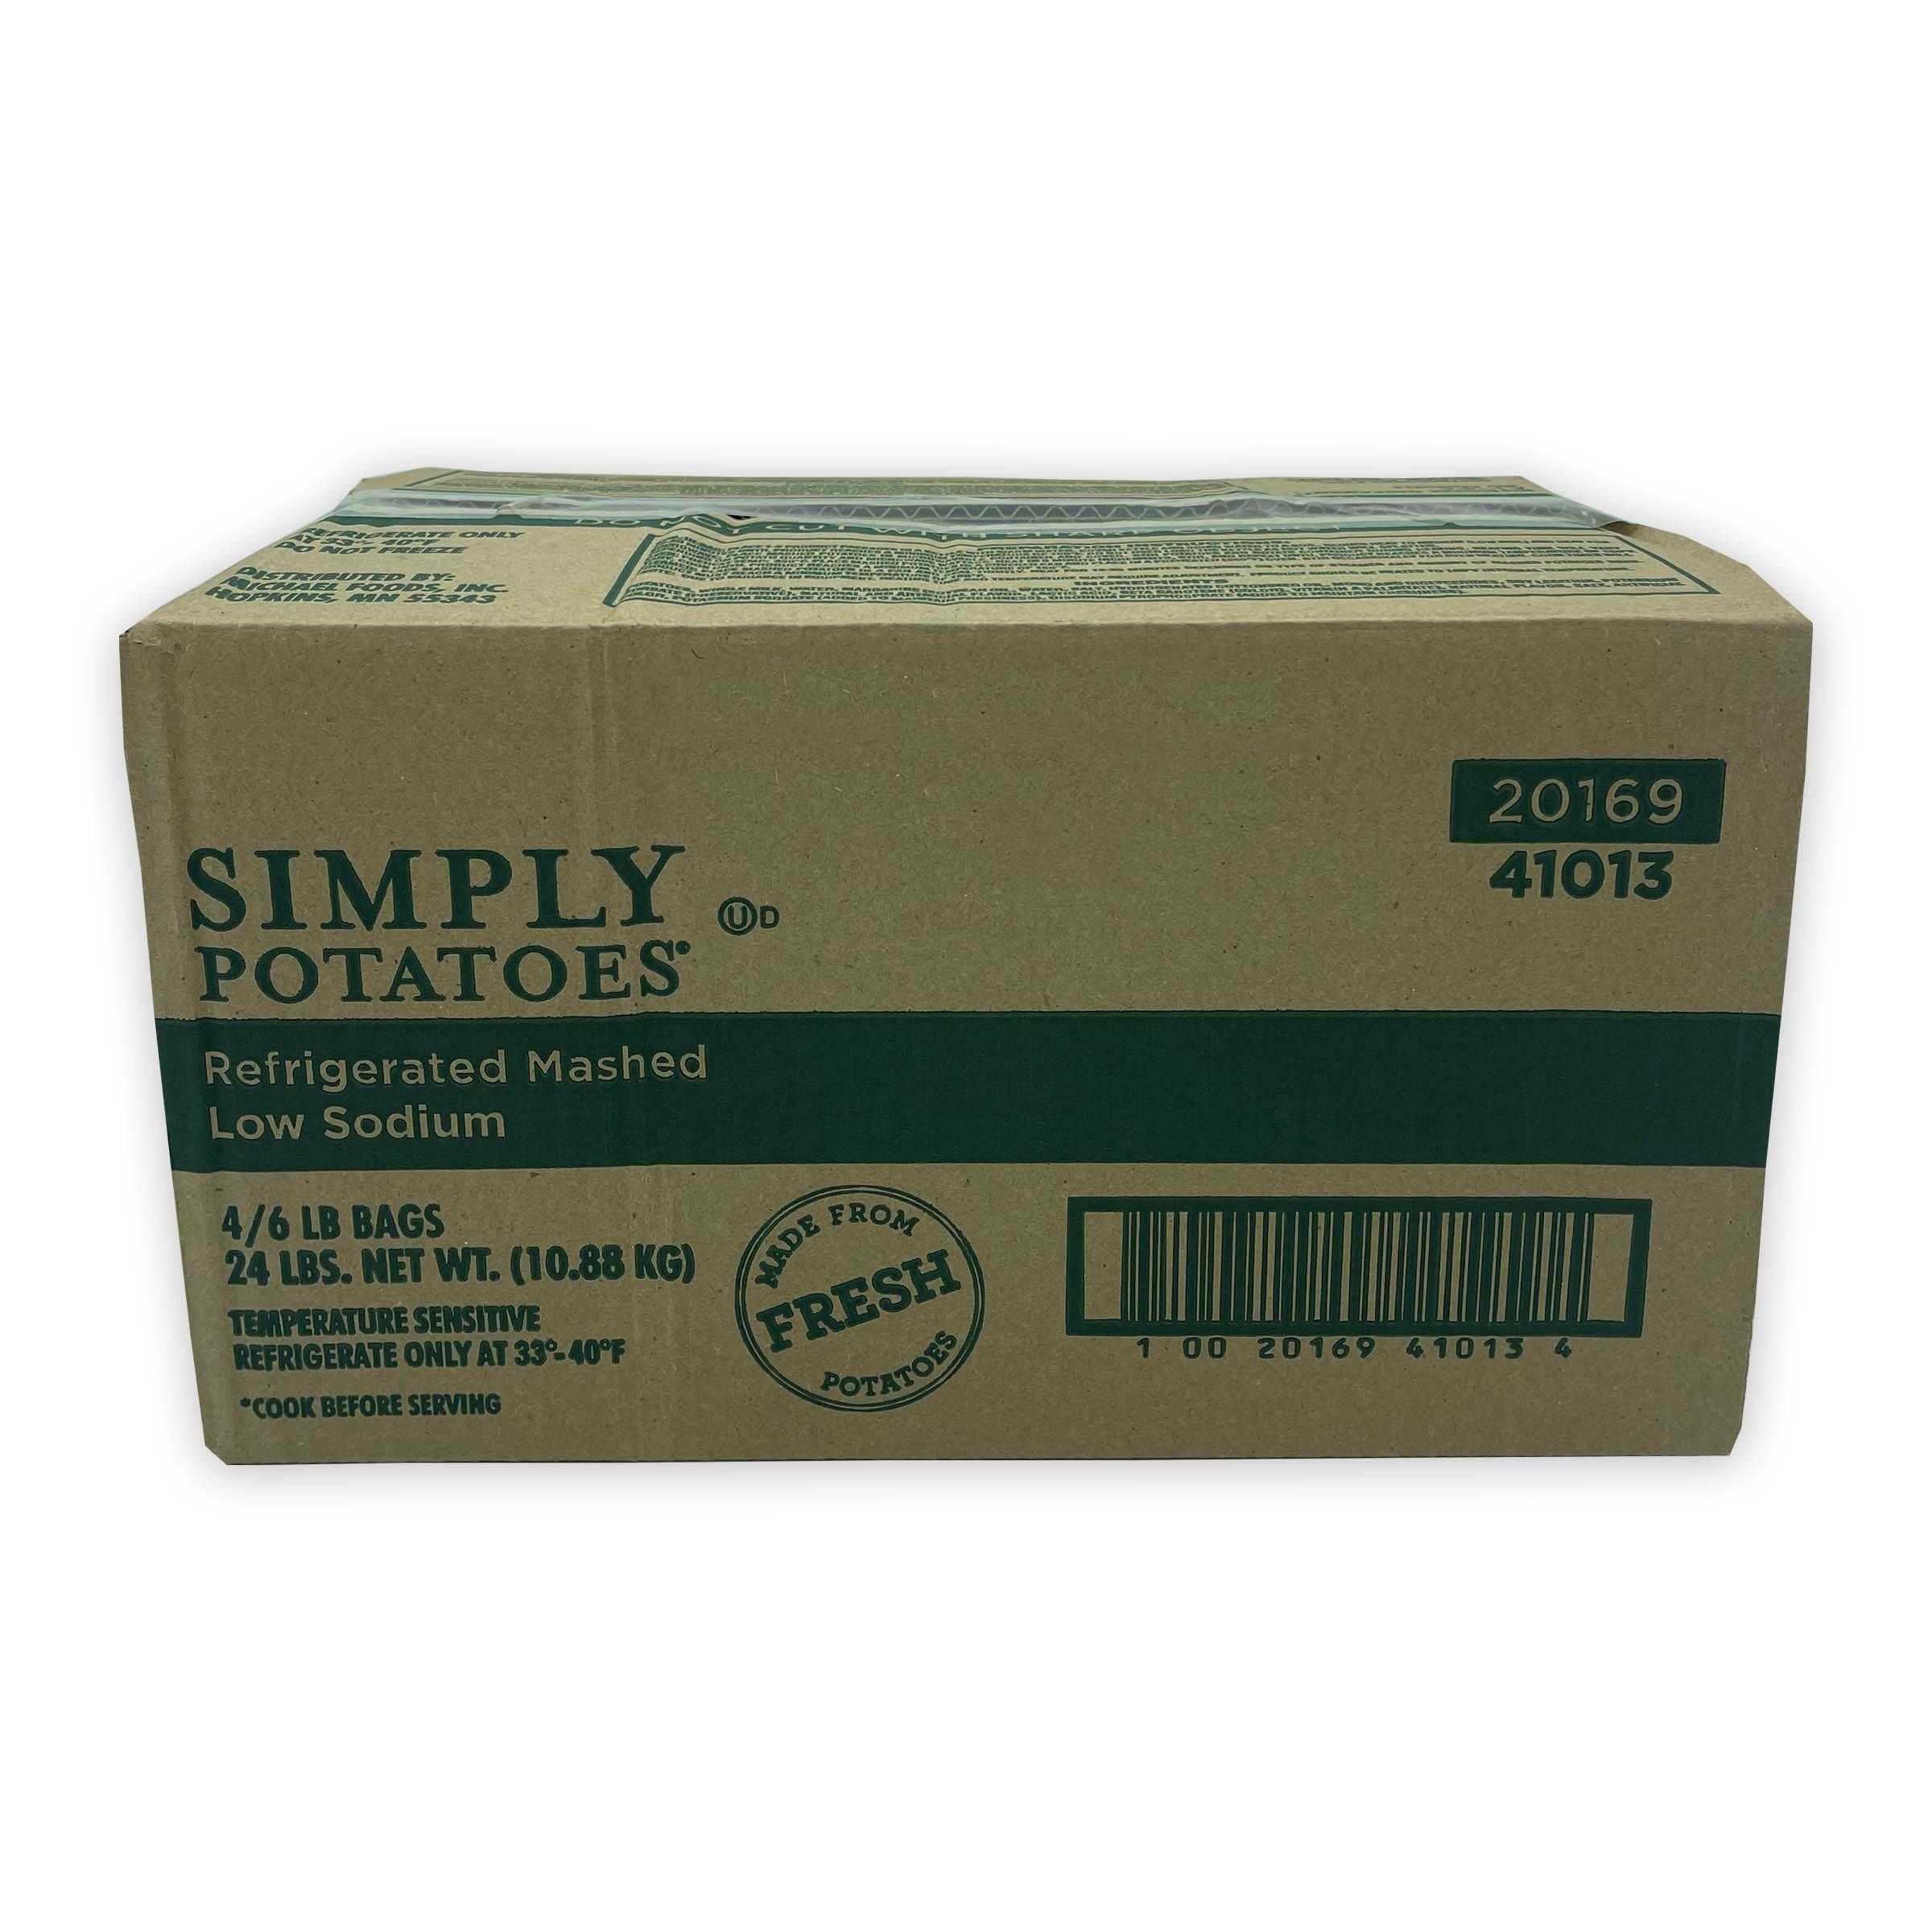 Simply Potatoes, Refrigerated Low Sodium Mashed Potatoes, Peeled Russet Potatoes, 4/6 Lb Bags